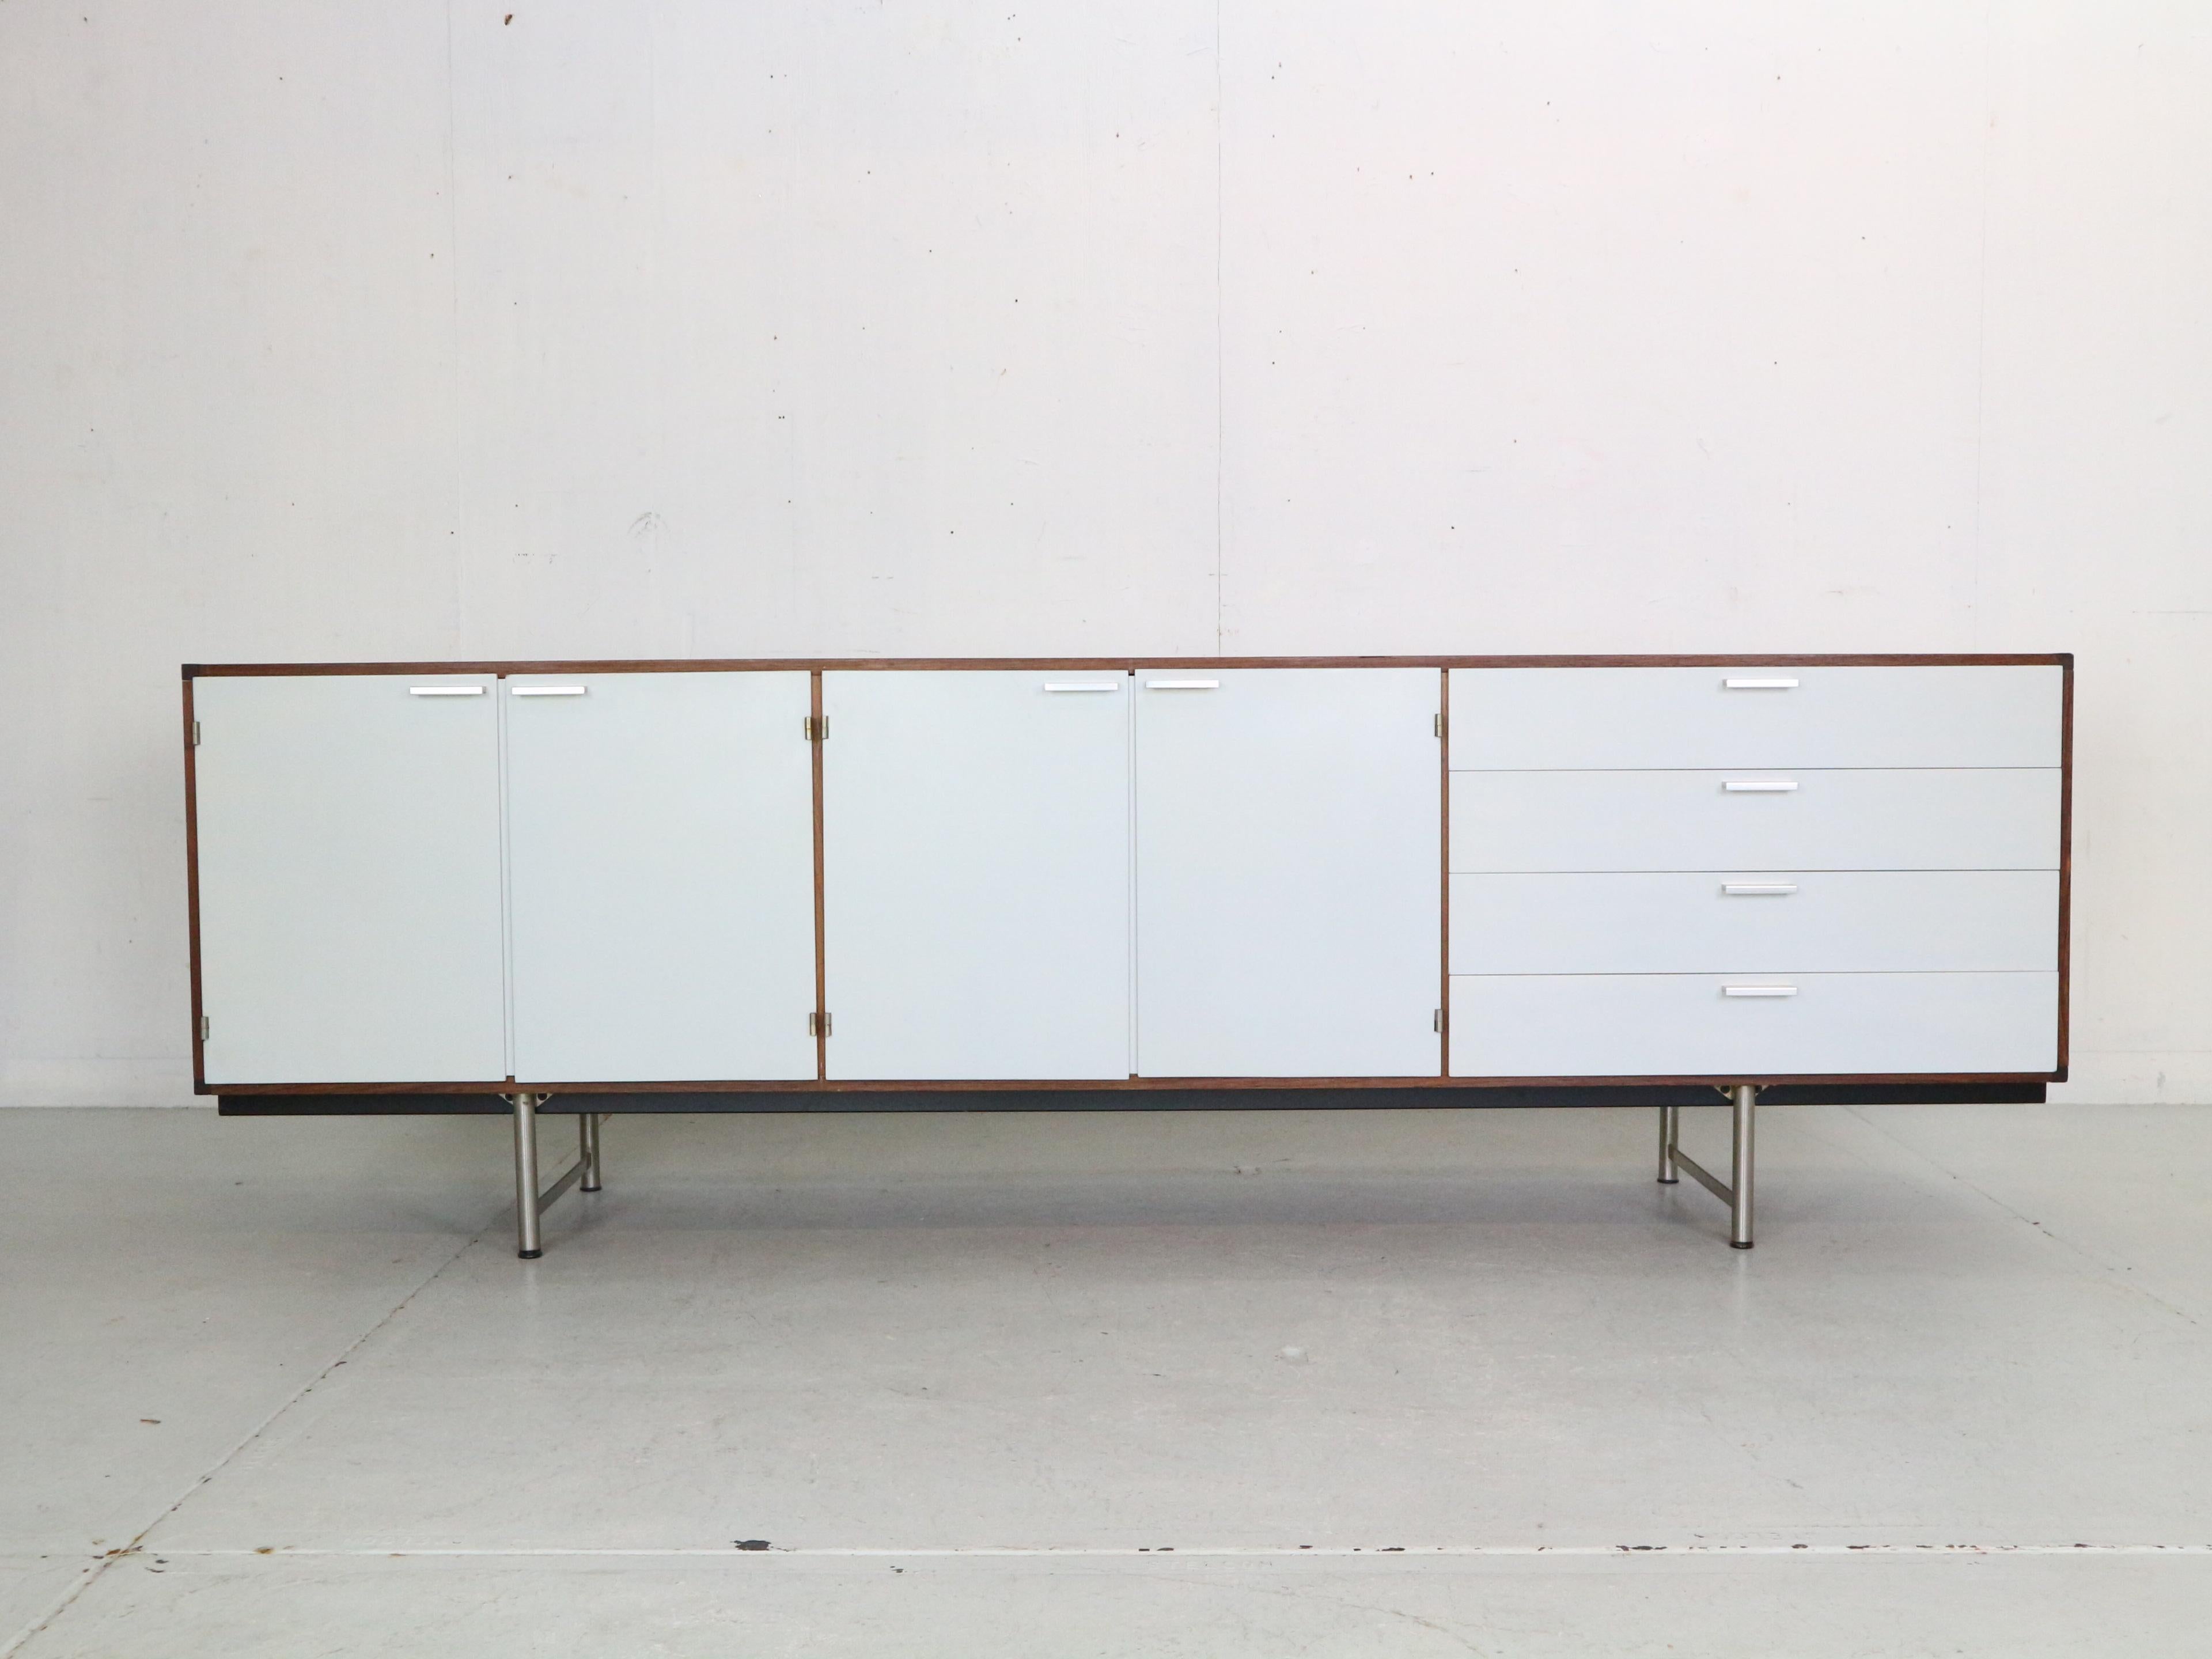 Mid-Century Modern period sideboard designed by Cees Braakman and manufactured by Dutch design famous manufacture- Pastoe, 1960's The Netherlands.

This sideboard is from the Made-to-measure / CR-serie. It has removable and height adjustable